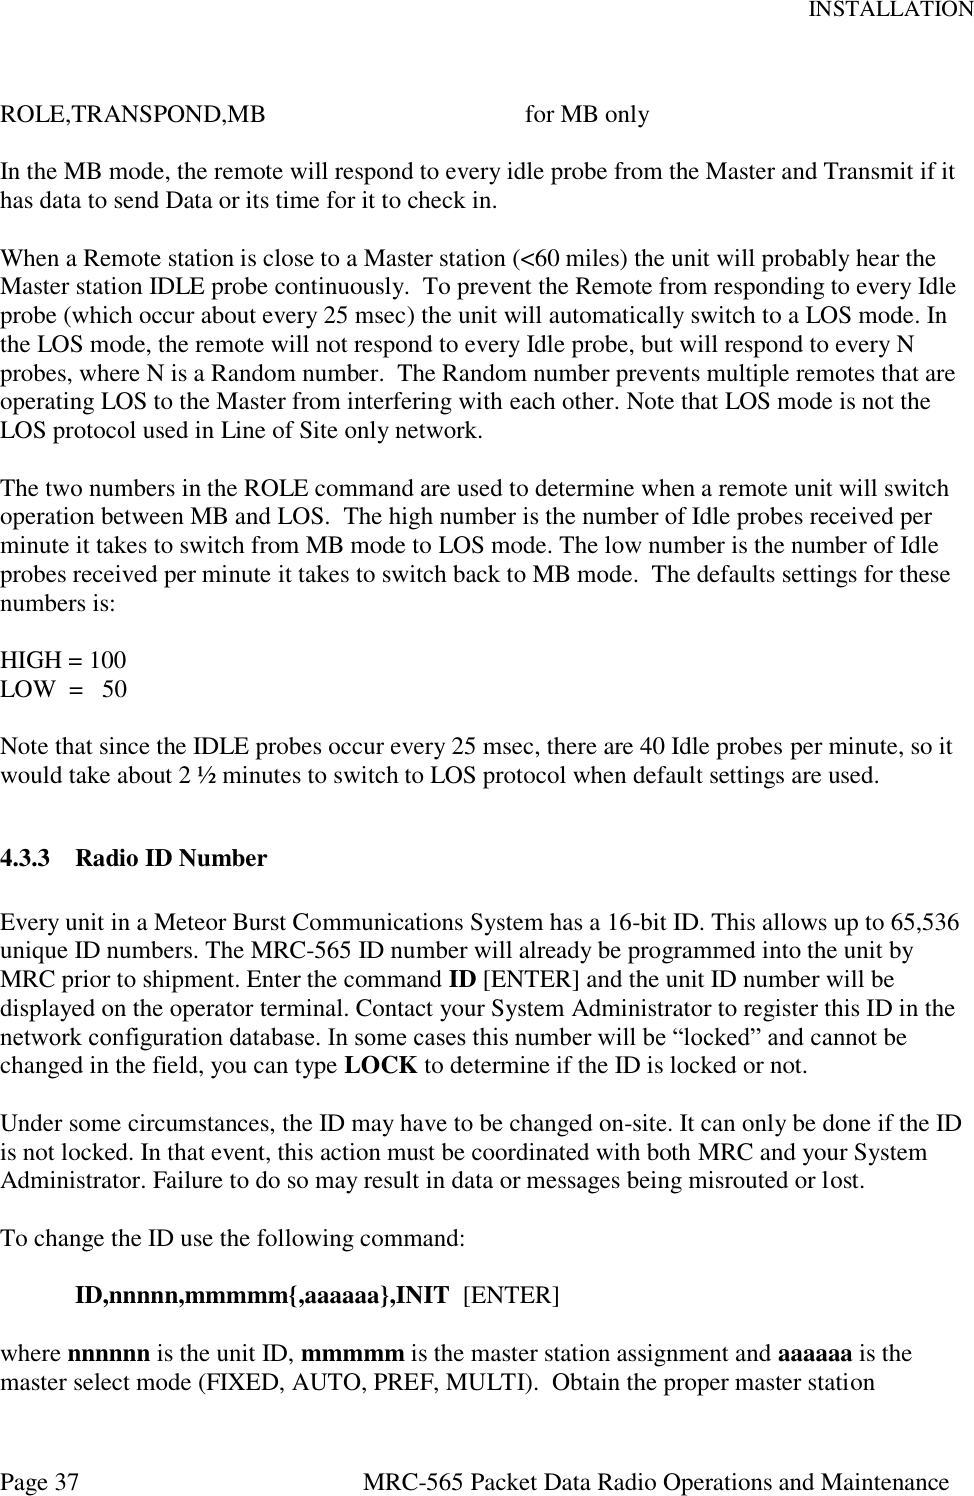 INSTALLATION Page 37  MRC-565 Packet Data Radio Operations and Maintenance  ROLE,TRANSPOND,MB        for MB only  In the MB mode, the remote will respond to every idle probe from the Master and Transmit if it has data to send Data or its time for it to check in.    When a Remote station is close to a Master station (&lt;60 miles) the unit will probably hear the Master station IDLE probe continuously.  To prevent the Remote from responding to every Idle probe (which occur about every 25 msec) the unit will automatically switch to a LOS mode. In the LOS mode, the remote will not respond to every Idle probe, but will respond to every N probes, where N is a Random number.  The Random number prevents multiple remotes that are operating LOS to the Master from interfering with each other. Note that LOS mode is not the LOS protocol used in Line of Site only network.  The two numbers in the ROLE command are used to determine when a remote unit will switch operation between MB and LOS.  The high number is the number of Idle probes received per minute it takes to switch from MB mode to LOS mode. The low number is the number of Idle probes received per minute it takes to switch back to MB mode.  The defaults settings for these numbers is:  HIGH = 100 LOW  =   50  Note that since the IDLE probes occur every 25 msec, there are 40 Idle probes per minute, so it would take about 2 ½ minutes to switch to LOS protocol when default settings are used.  4.3.3 Radio ID Number  Every unit in a Meteor Burst Communications System has a 16-bit ID. This allows up to 65,536 unique ID numbers. The MRC-565 ID number will already be programmed into the unit by MRC prior to shipment. Enter the command ID [ENTER] and the unit ID number will be displayed on the operator terminal. Contact your System Administrator to register this ID in the network configuration database. In some cases this number will be “locked” and cannot be changed in the field, you can type LOCK to determine if the ID is locked or not.  Under some circumstances, the ID may have to be changed on-site. It can only be done if the ID is not locked. In that event, this action must be coordinated with both MRC and your System Administrator. Failure to do so may result in data or messages being misrouted or lost.    To change the ID use the following command:  ID,nnnnn,mmmmm{,aaaaaa},INIT  [ENTER]  where nnnnnn is the unit ID, mmmmm is the master station assignment and aaaaaa is the master select mode (FIXED, AUTO, PREF, MULTI).  Obtain the proper master station 